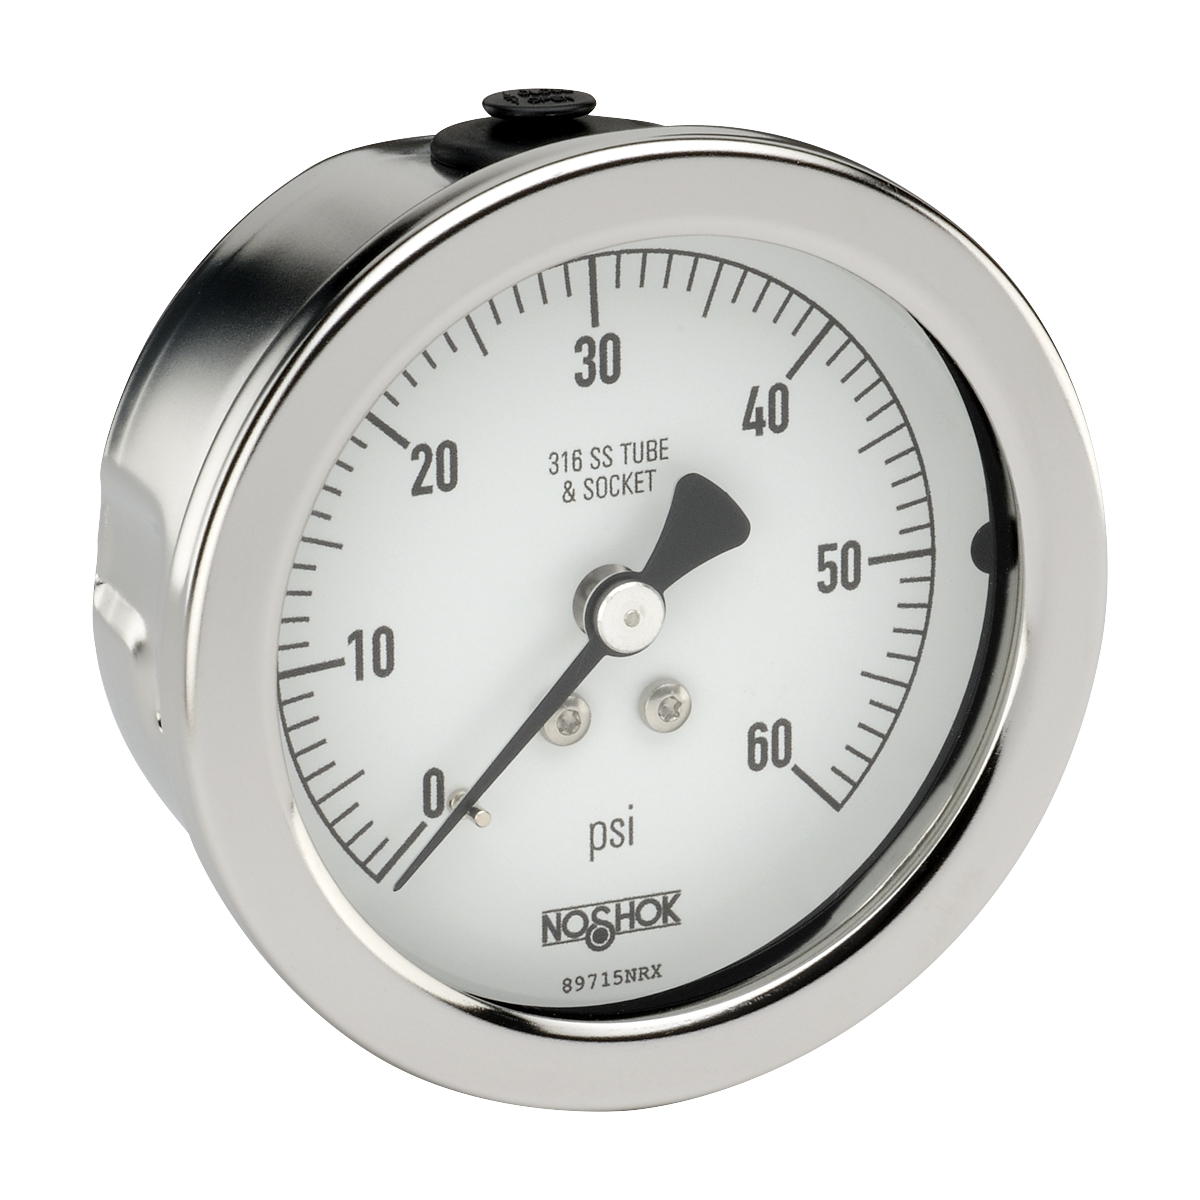 25-510-6000-psi-SSFF 400/500 Series All Stainless Steel Dry and Liquid Filled Pressure Gauges